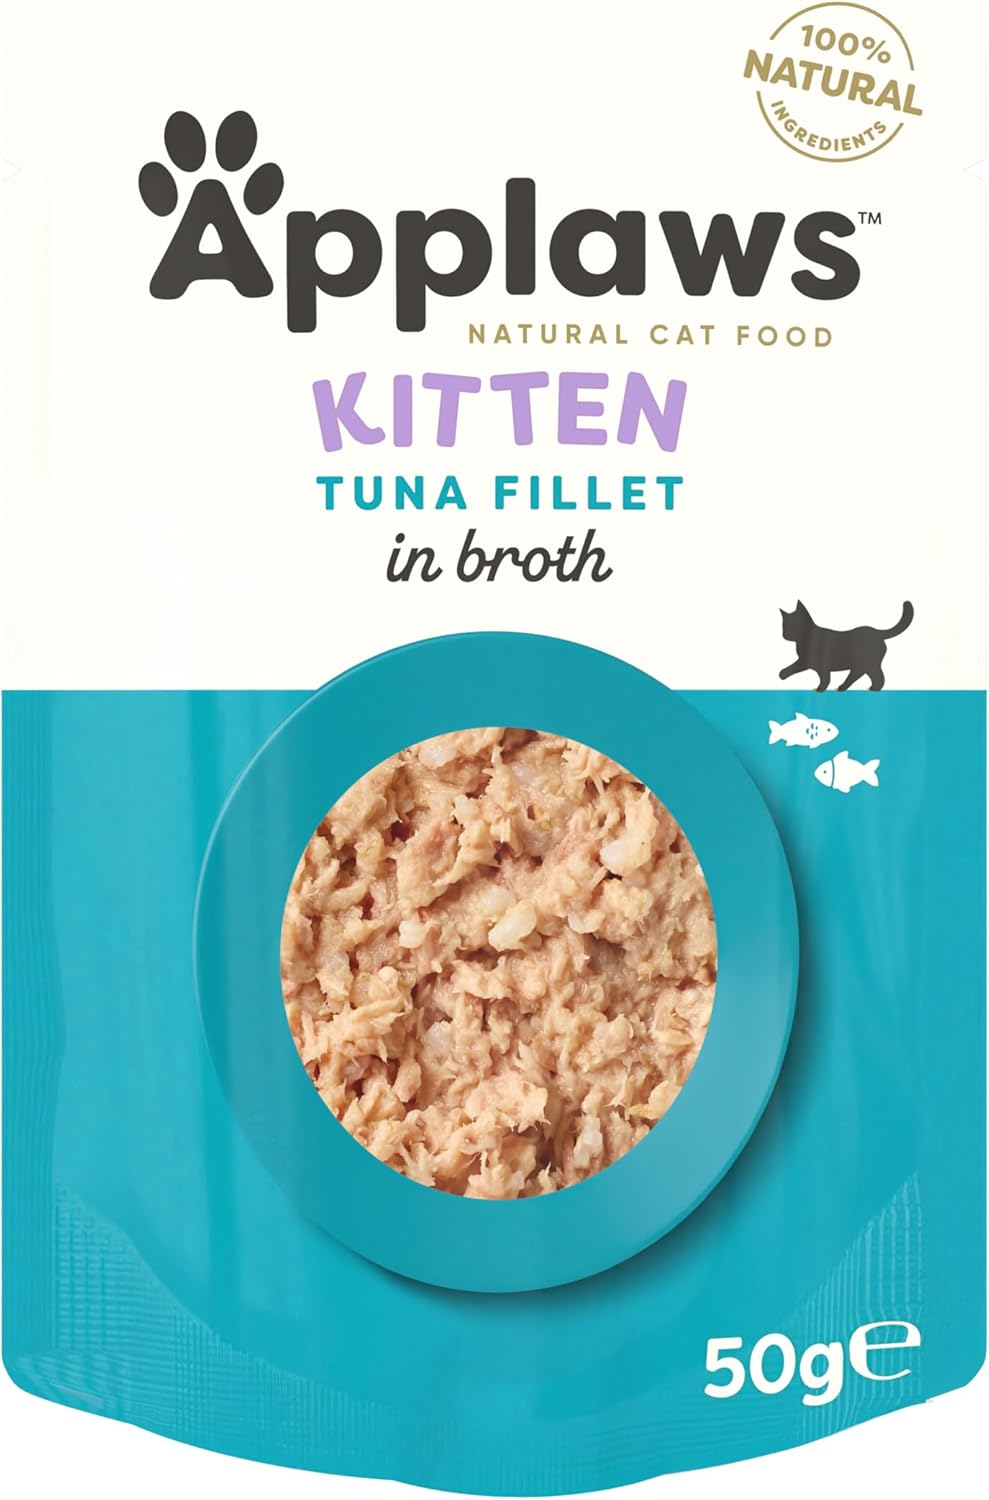 Applaws Natural Kitten Wet Food, Kitten Tuna in Broth 50g Pouch (12x50g Pack)